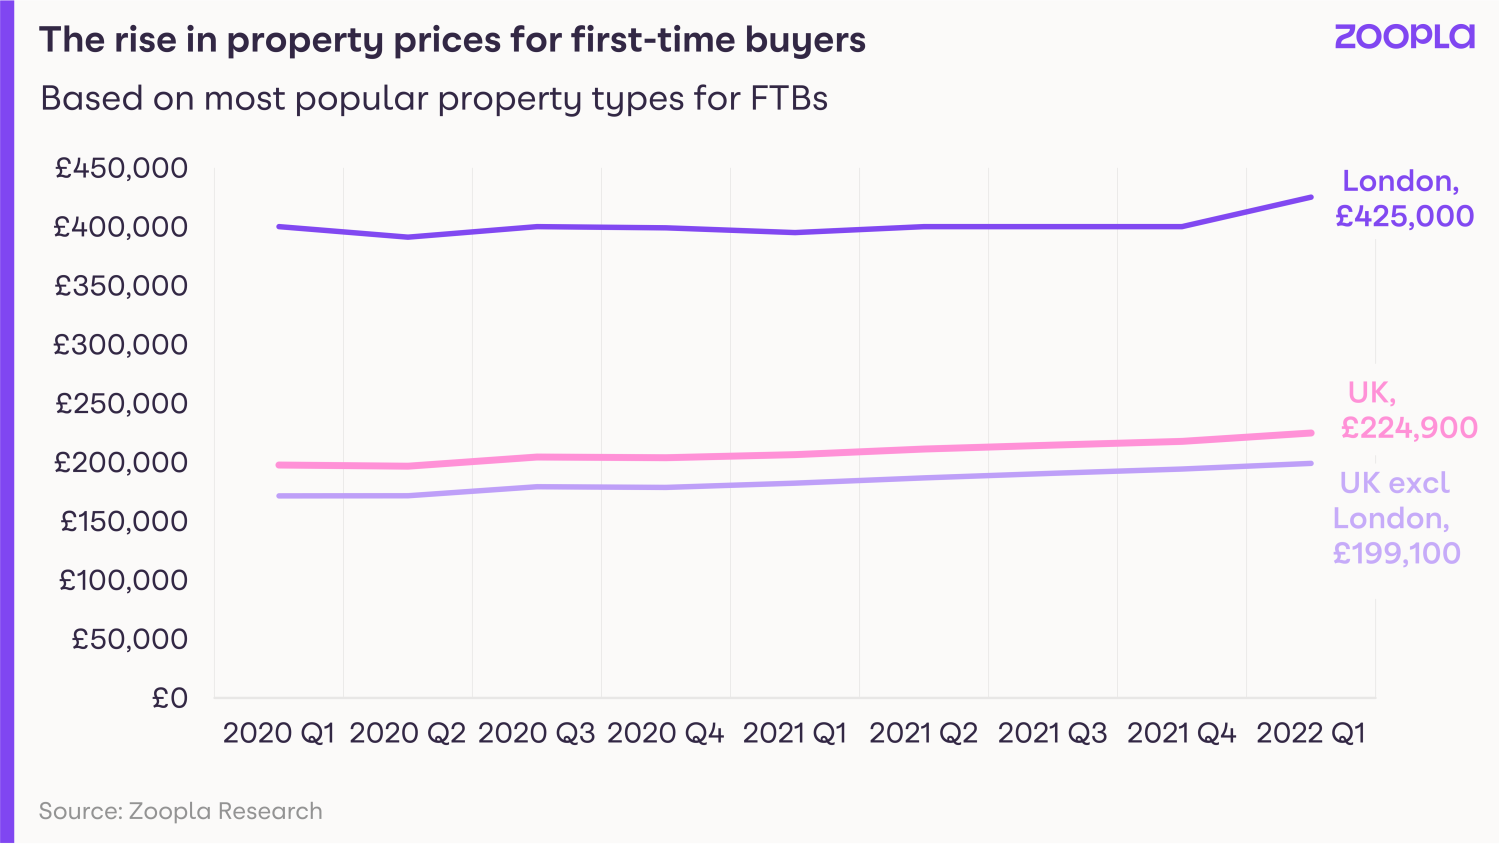 HPI March 2022 - rise in property prices for first-time buyers